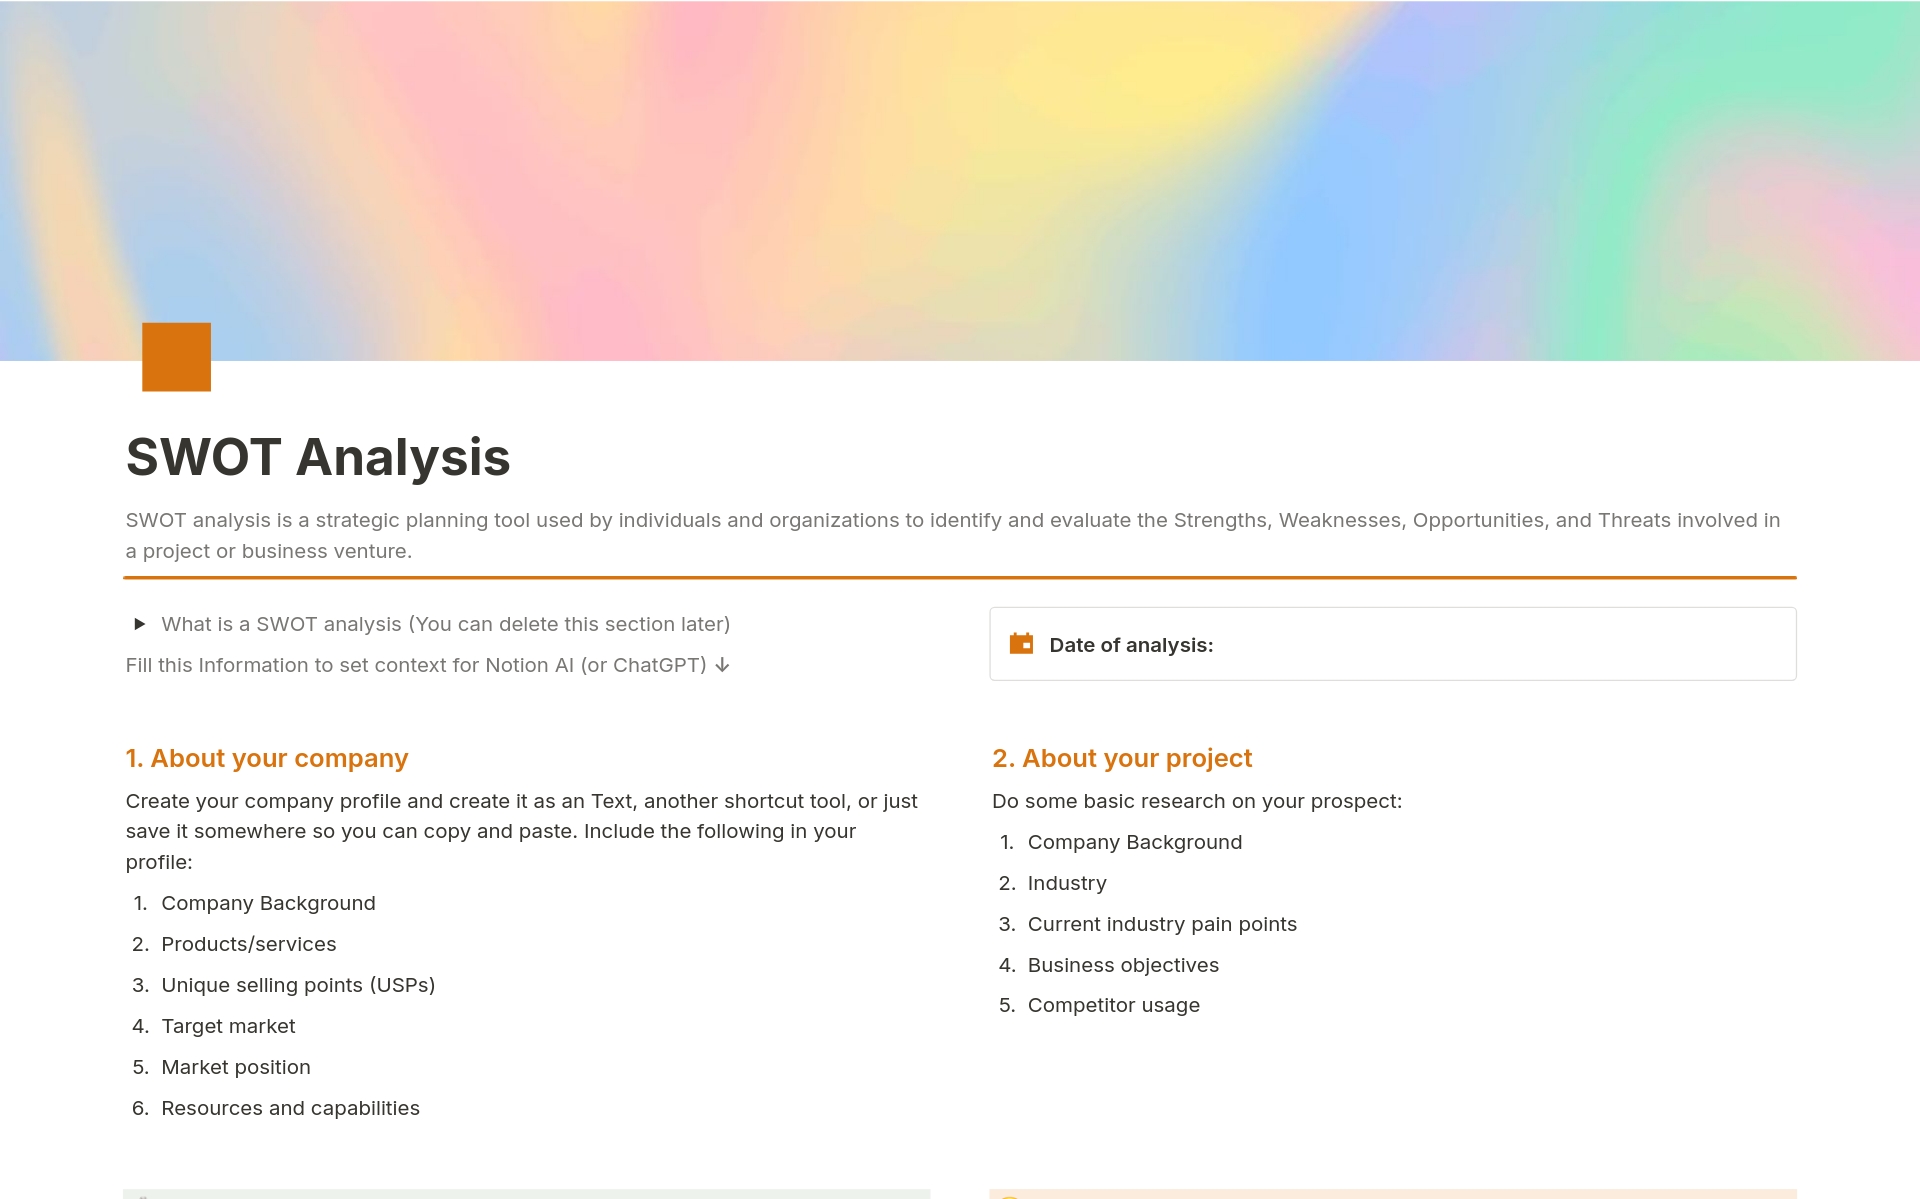 An AI-powered Notion template for SWOT analysis that uses intelligent suggestions to take users through an in-depth assessment of their strengths, weaknesses, opportunities, and threats.